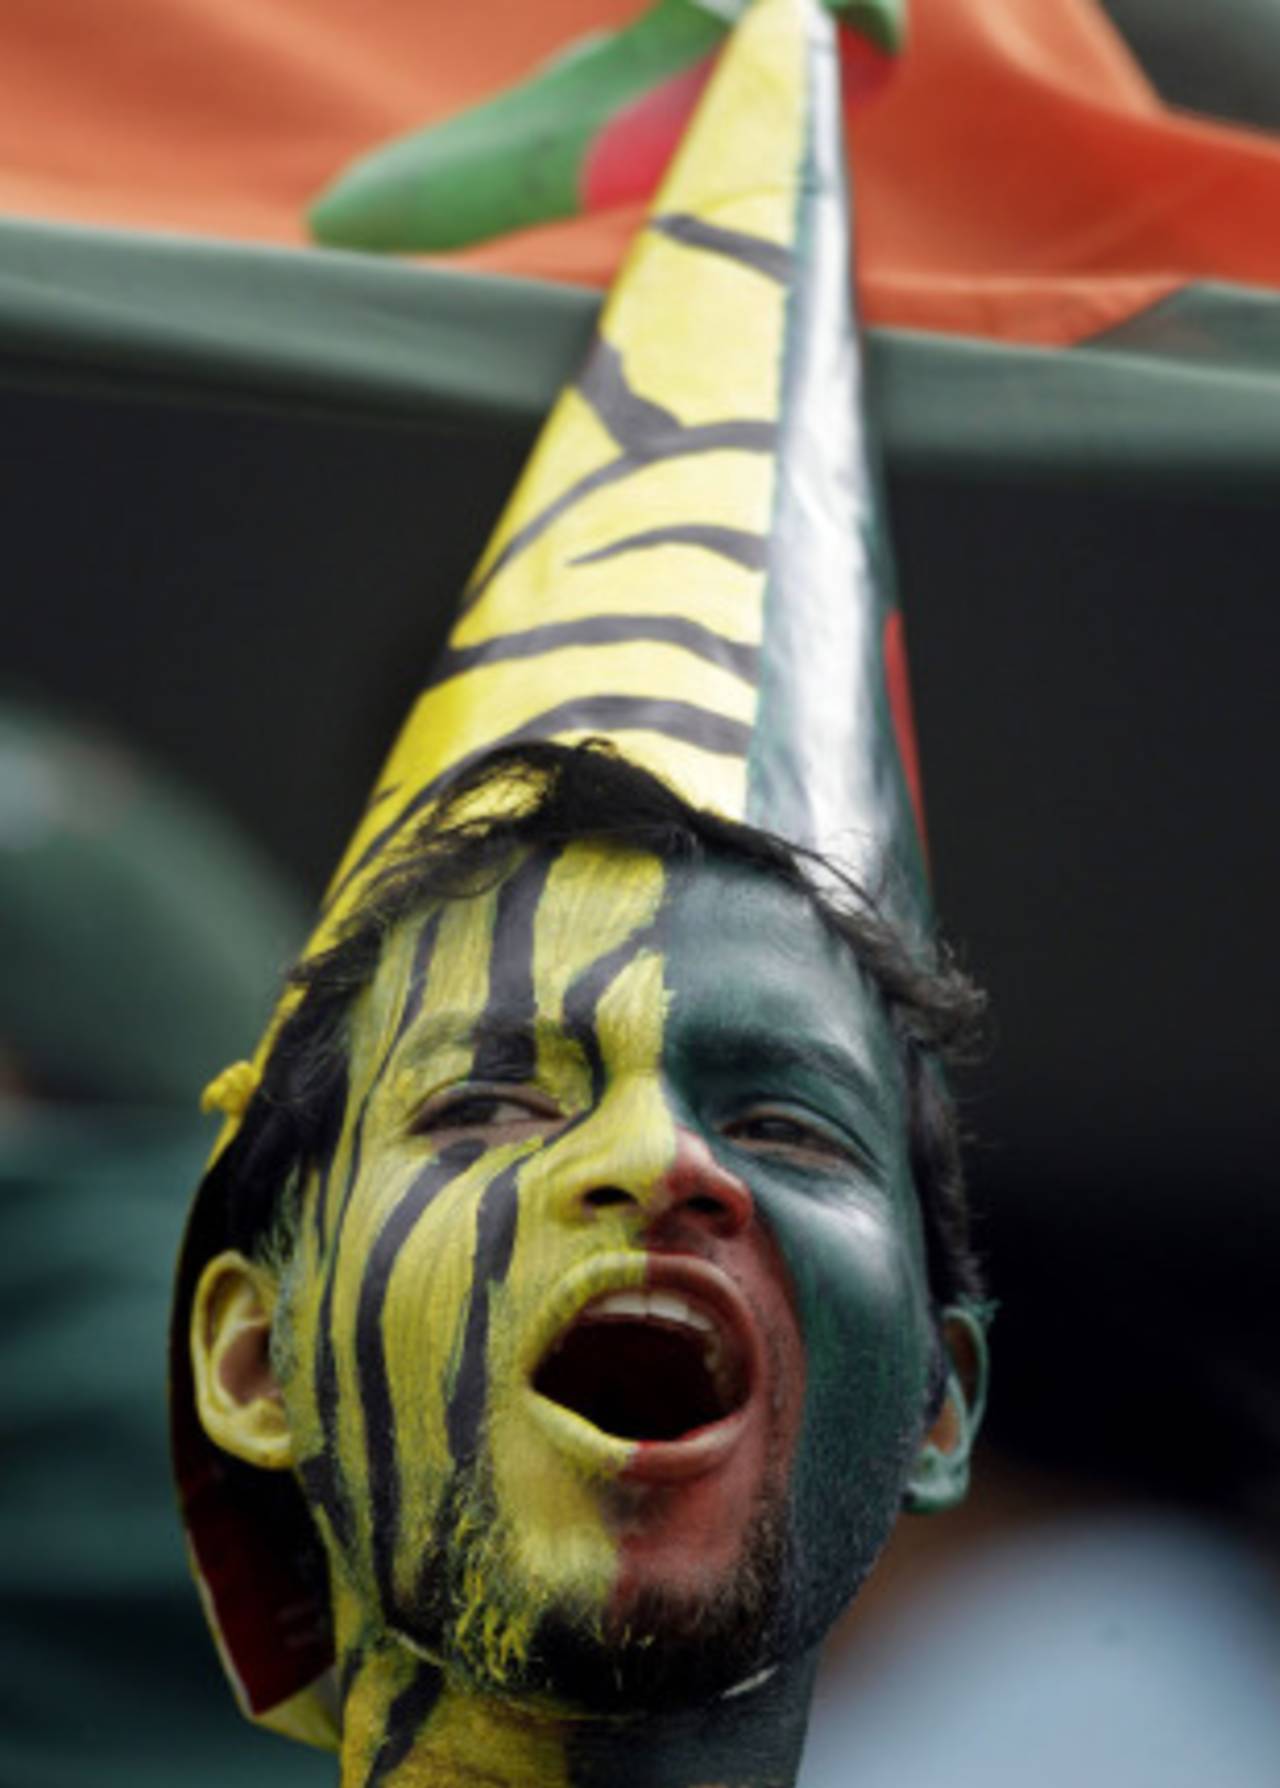 A Bangladesh fan cheers his team on, Bangladesh v South Africa, Group B, World Cup 2011, Mirpur, March 19, 2011